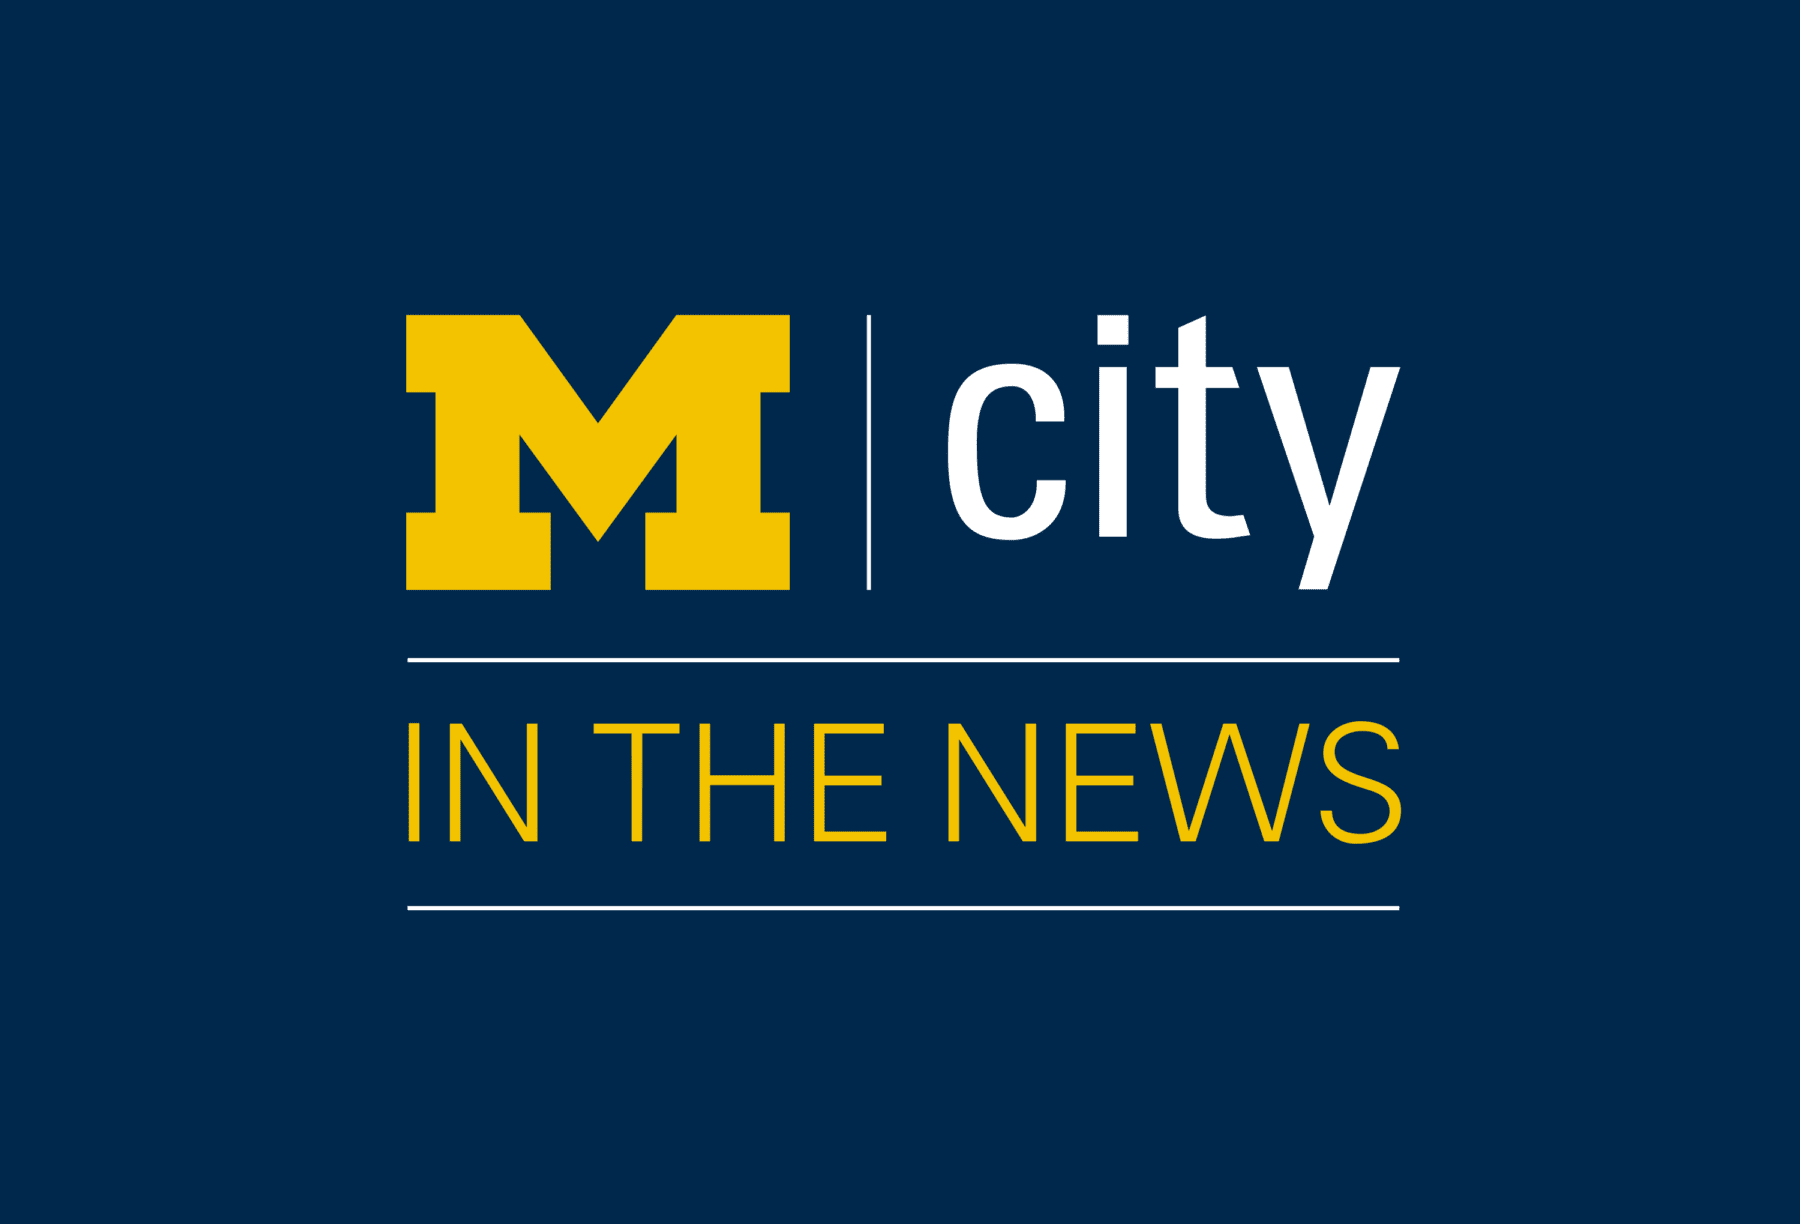 Mcity In the News logo